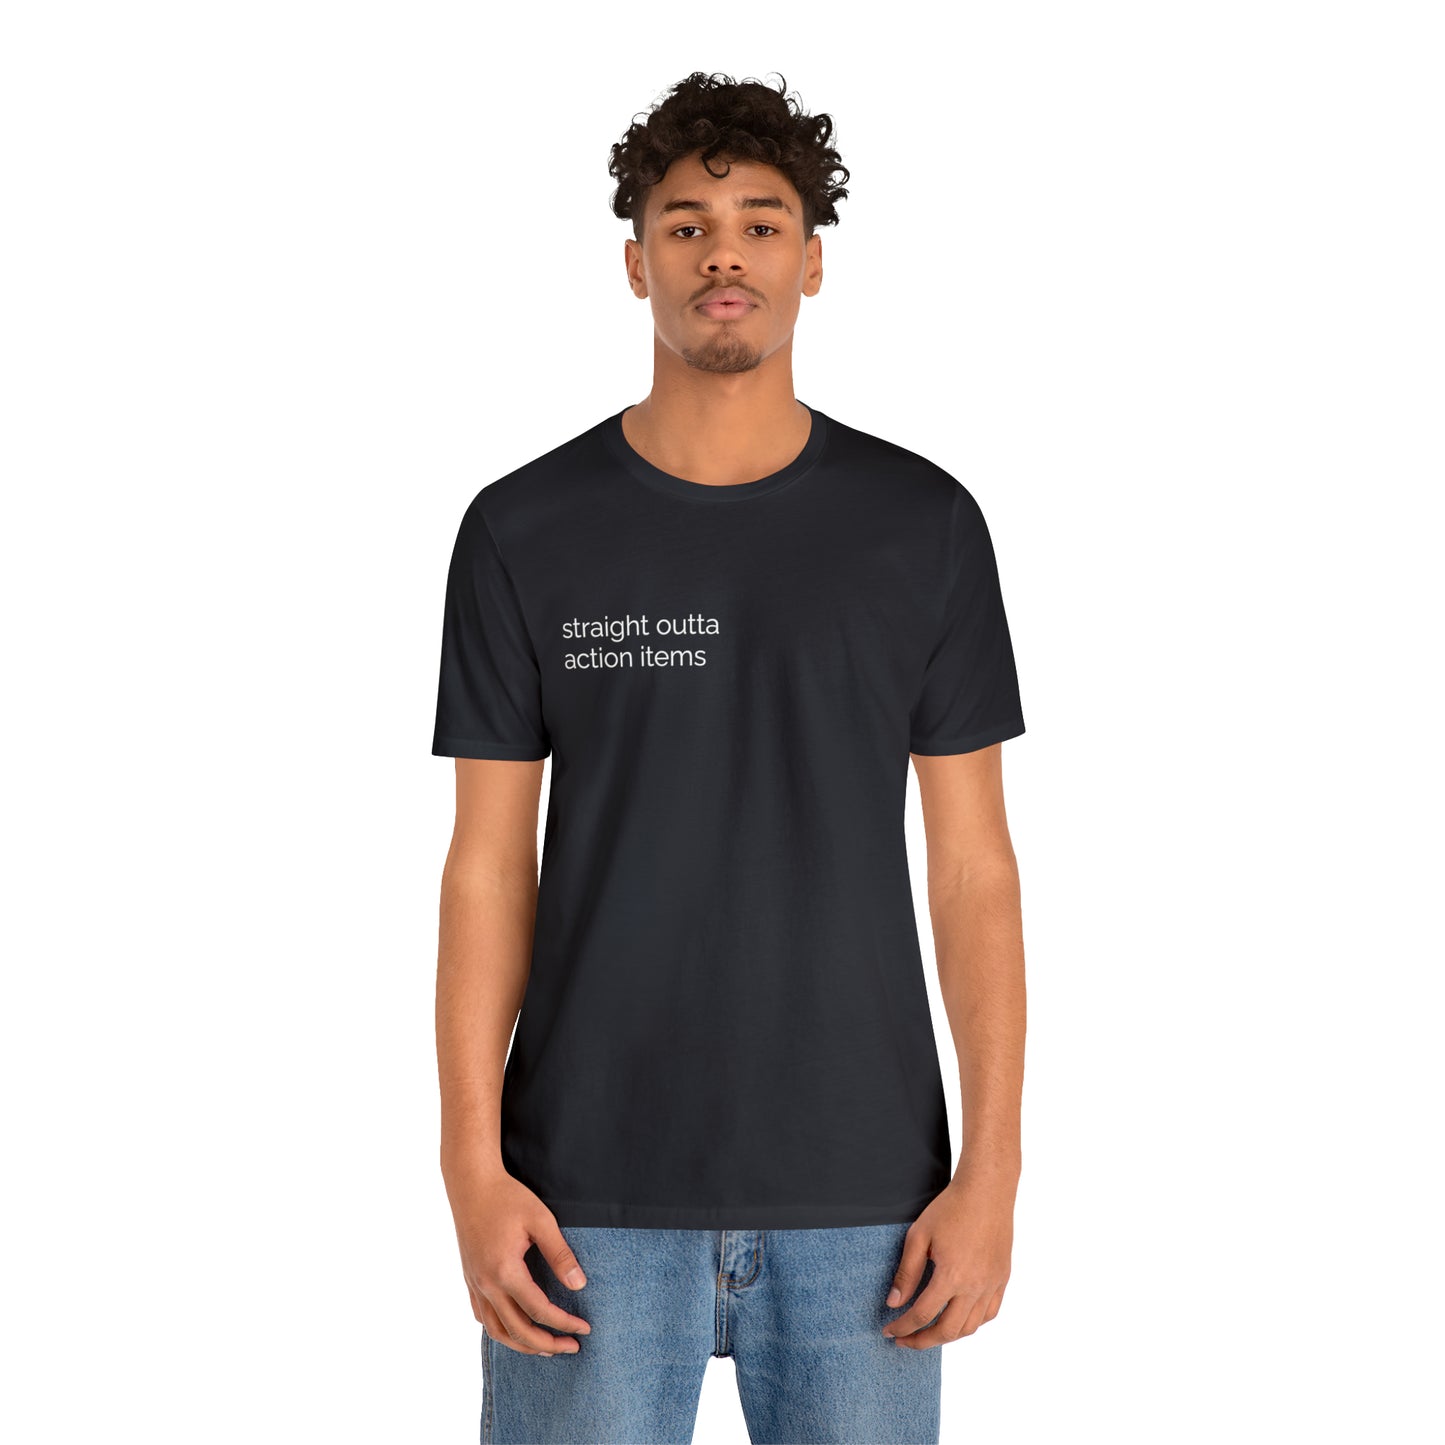 Straight Outta Action Items Shirt